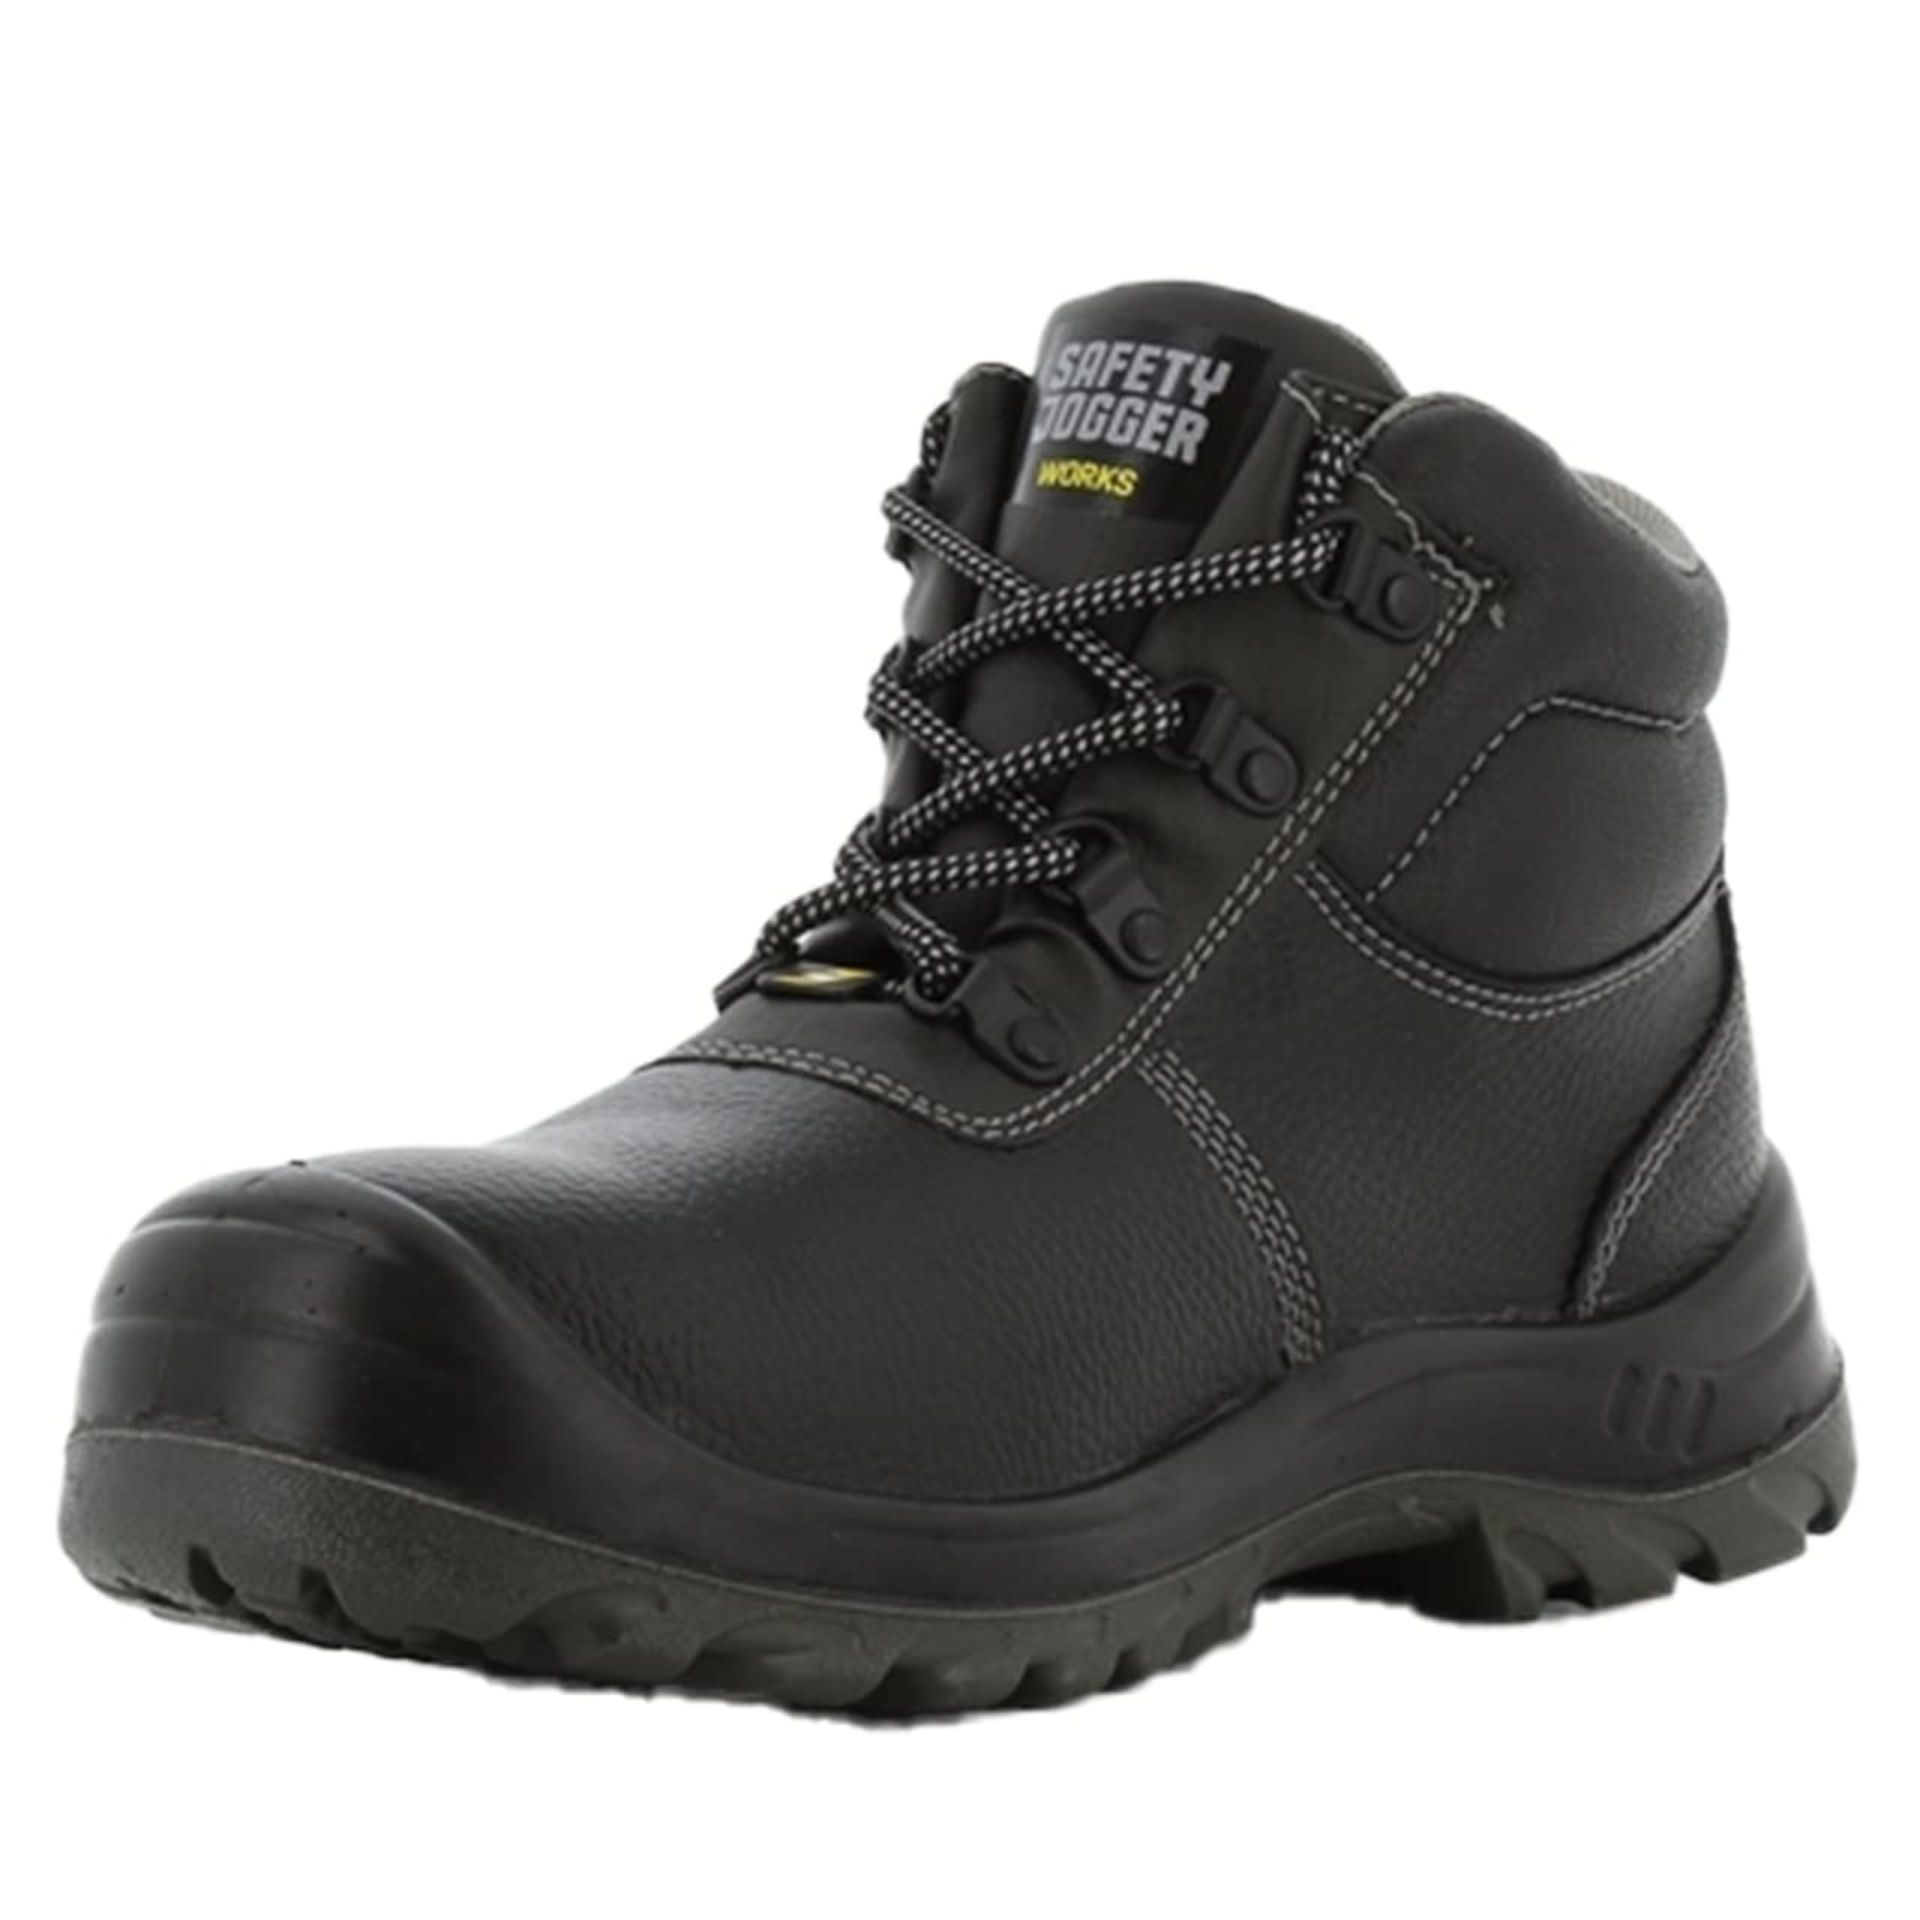 RRP - £25.55 Safety Jogger Safety Boot - Steel Toe Cap S3/S1P Work Shoe for Men or Women, Anti Slip